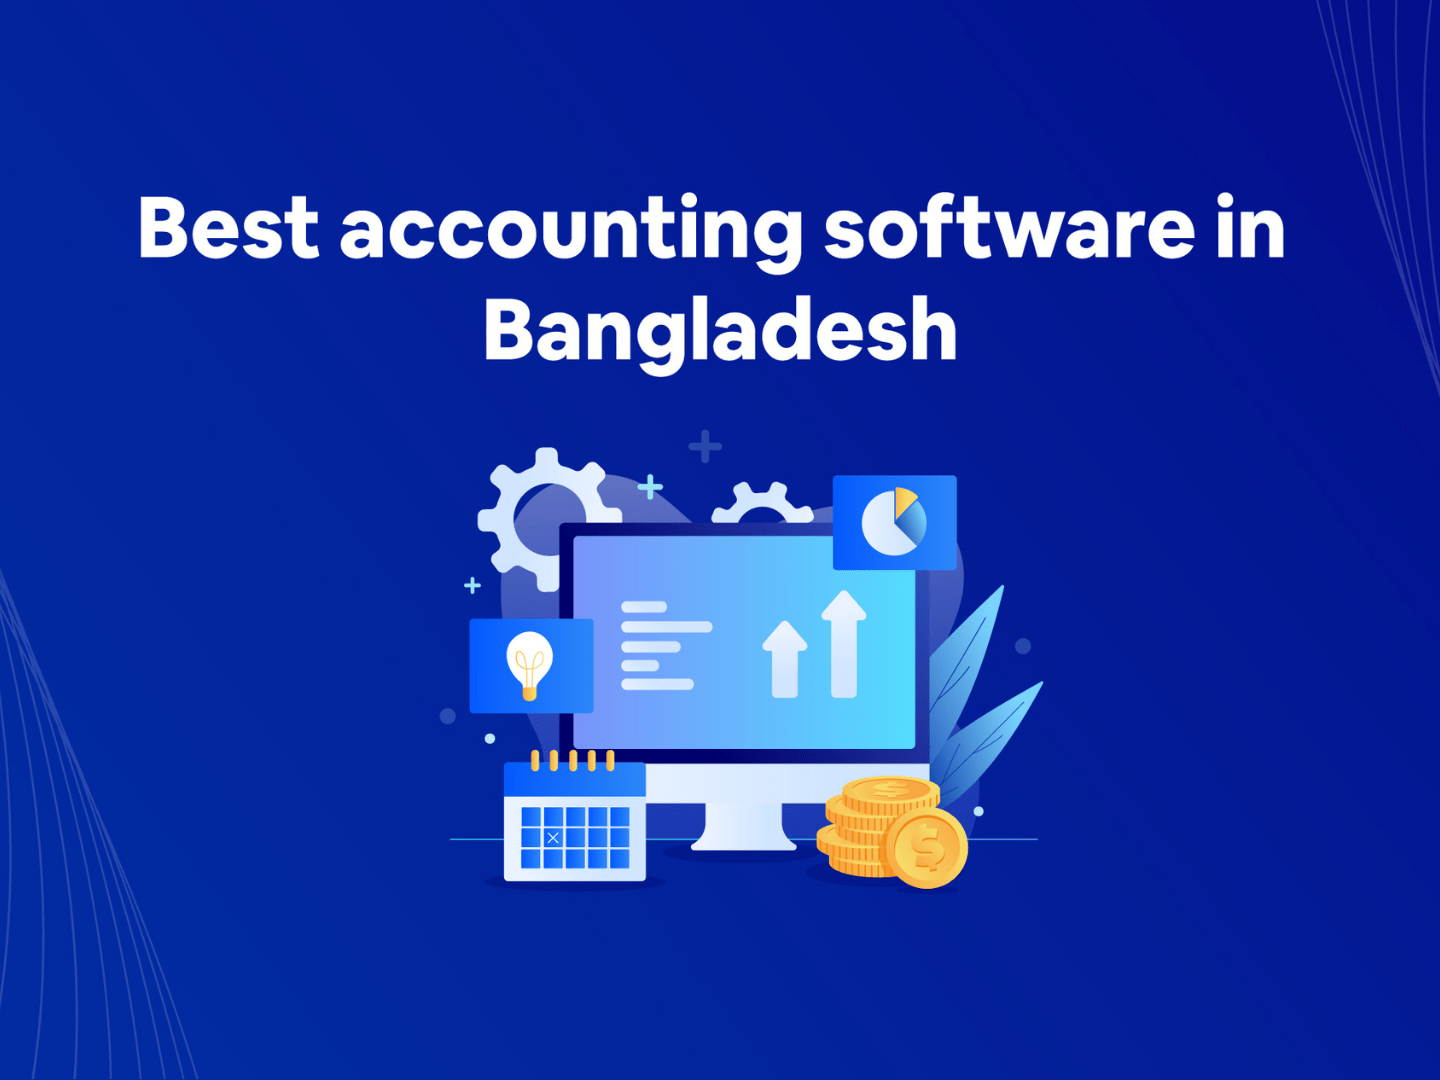 Best accounting software in Bangladesh